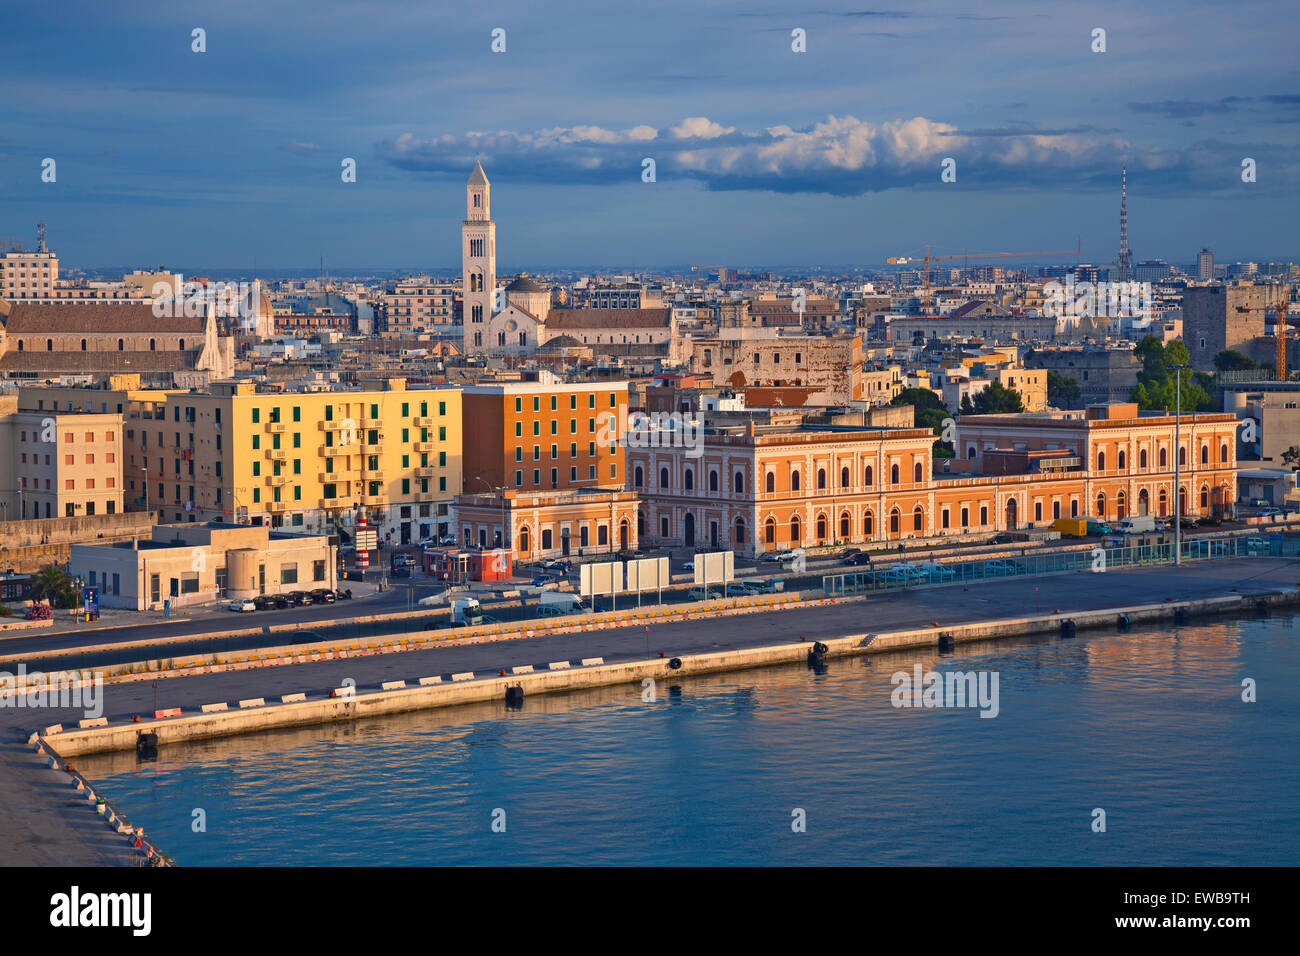 Port of Bari. Image of Bari located in southern Italy. Stock Photo